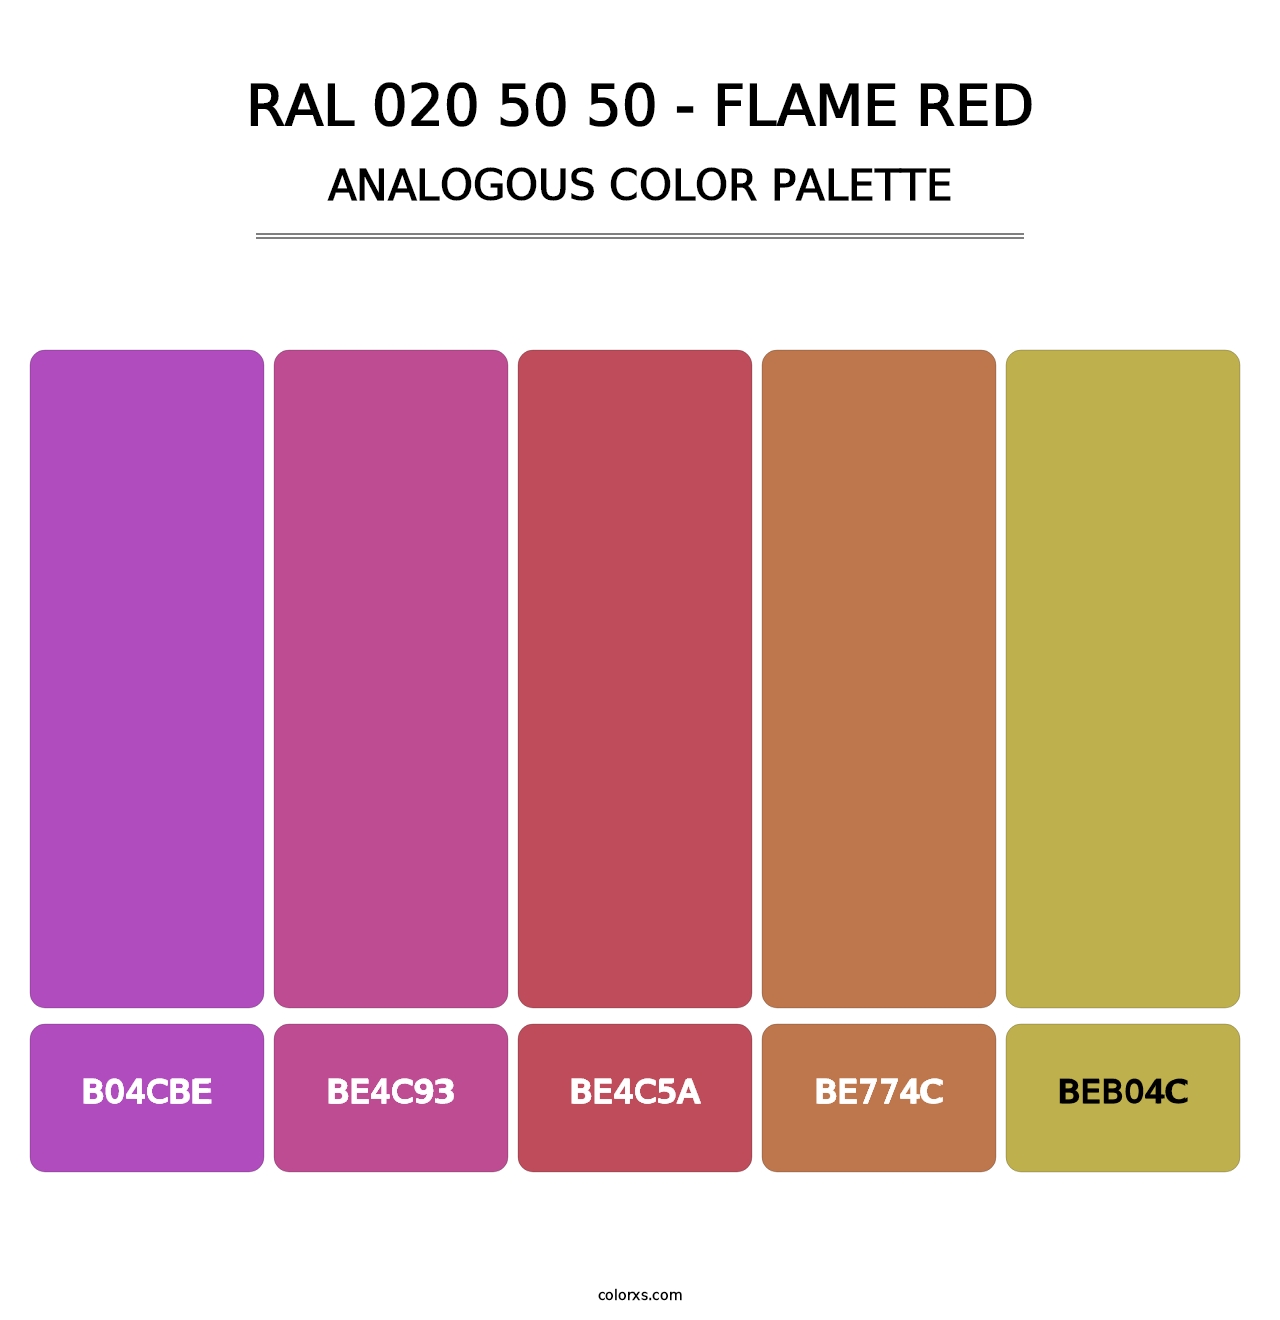 RAL 020 50 50 - Flame Red - Analogous Color Palette